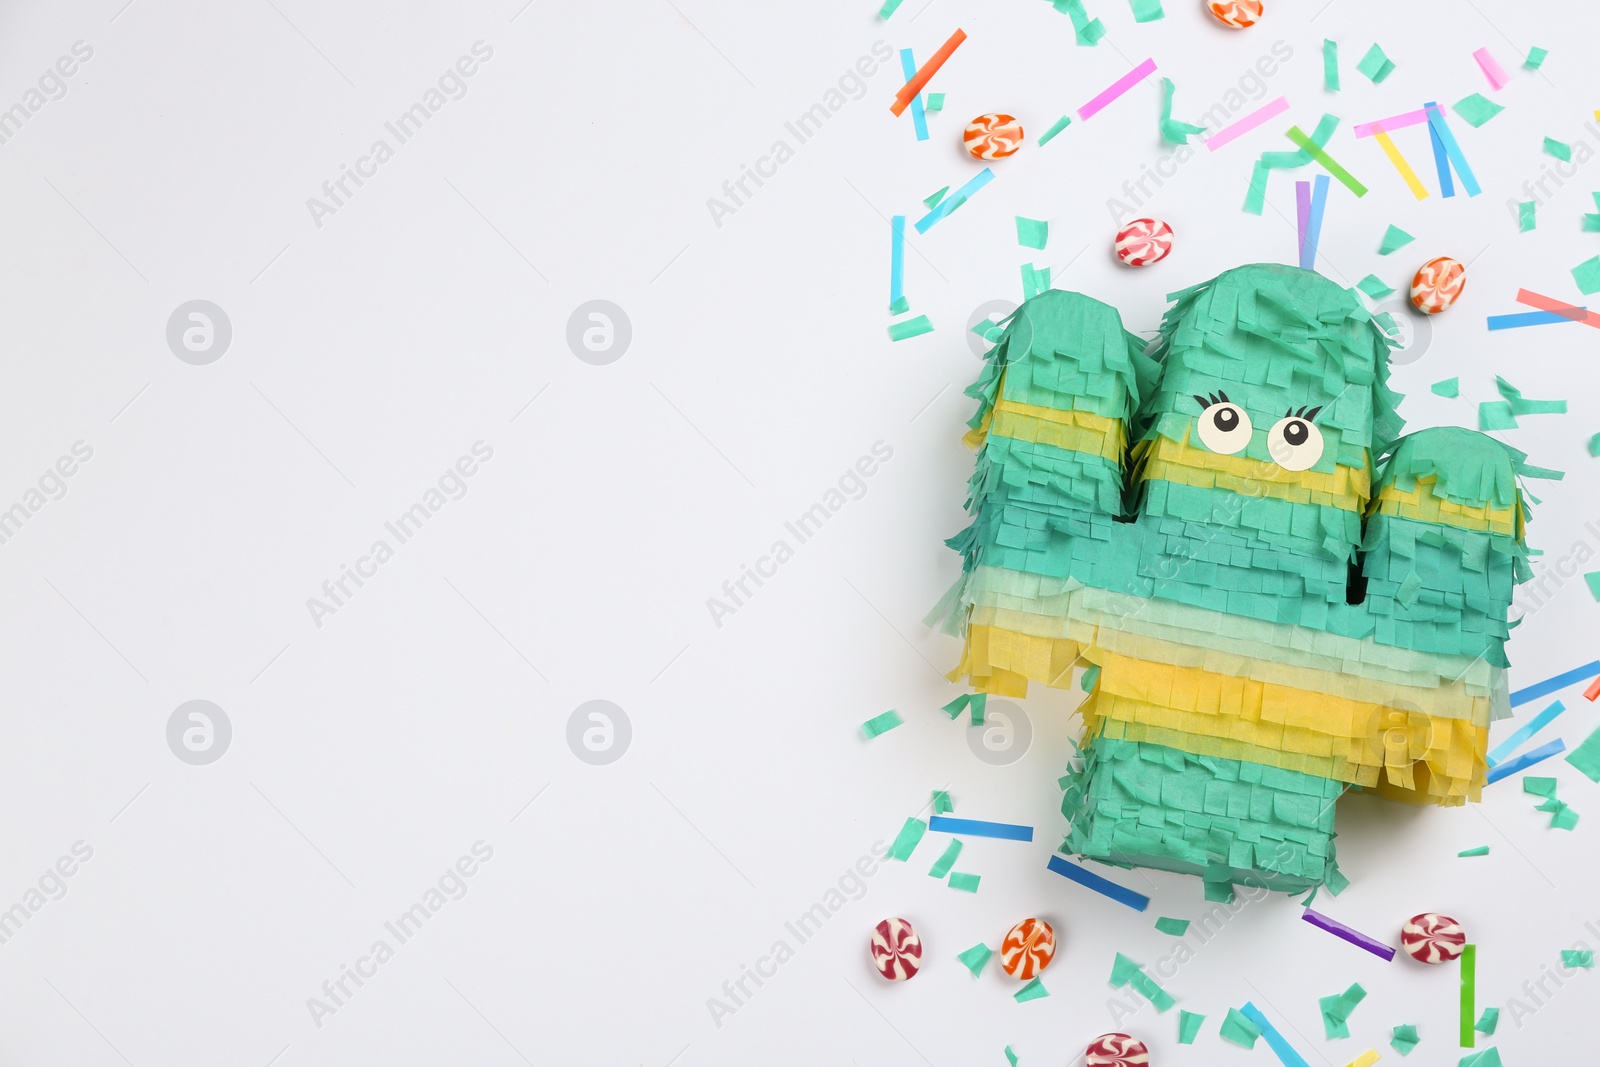 Photo of Composition with cactus shaped pinata and candies on white background, top view